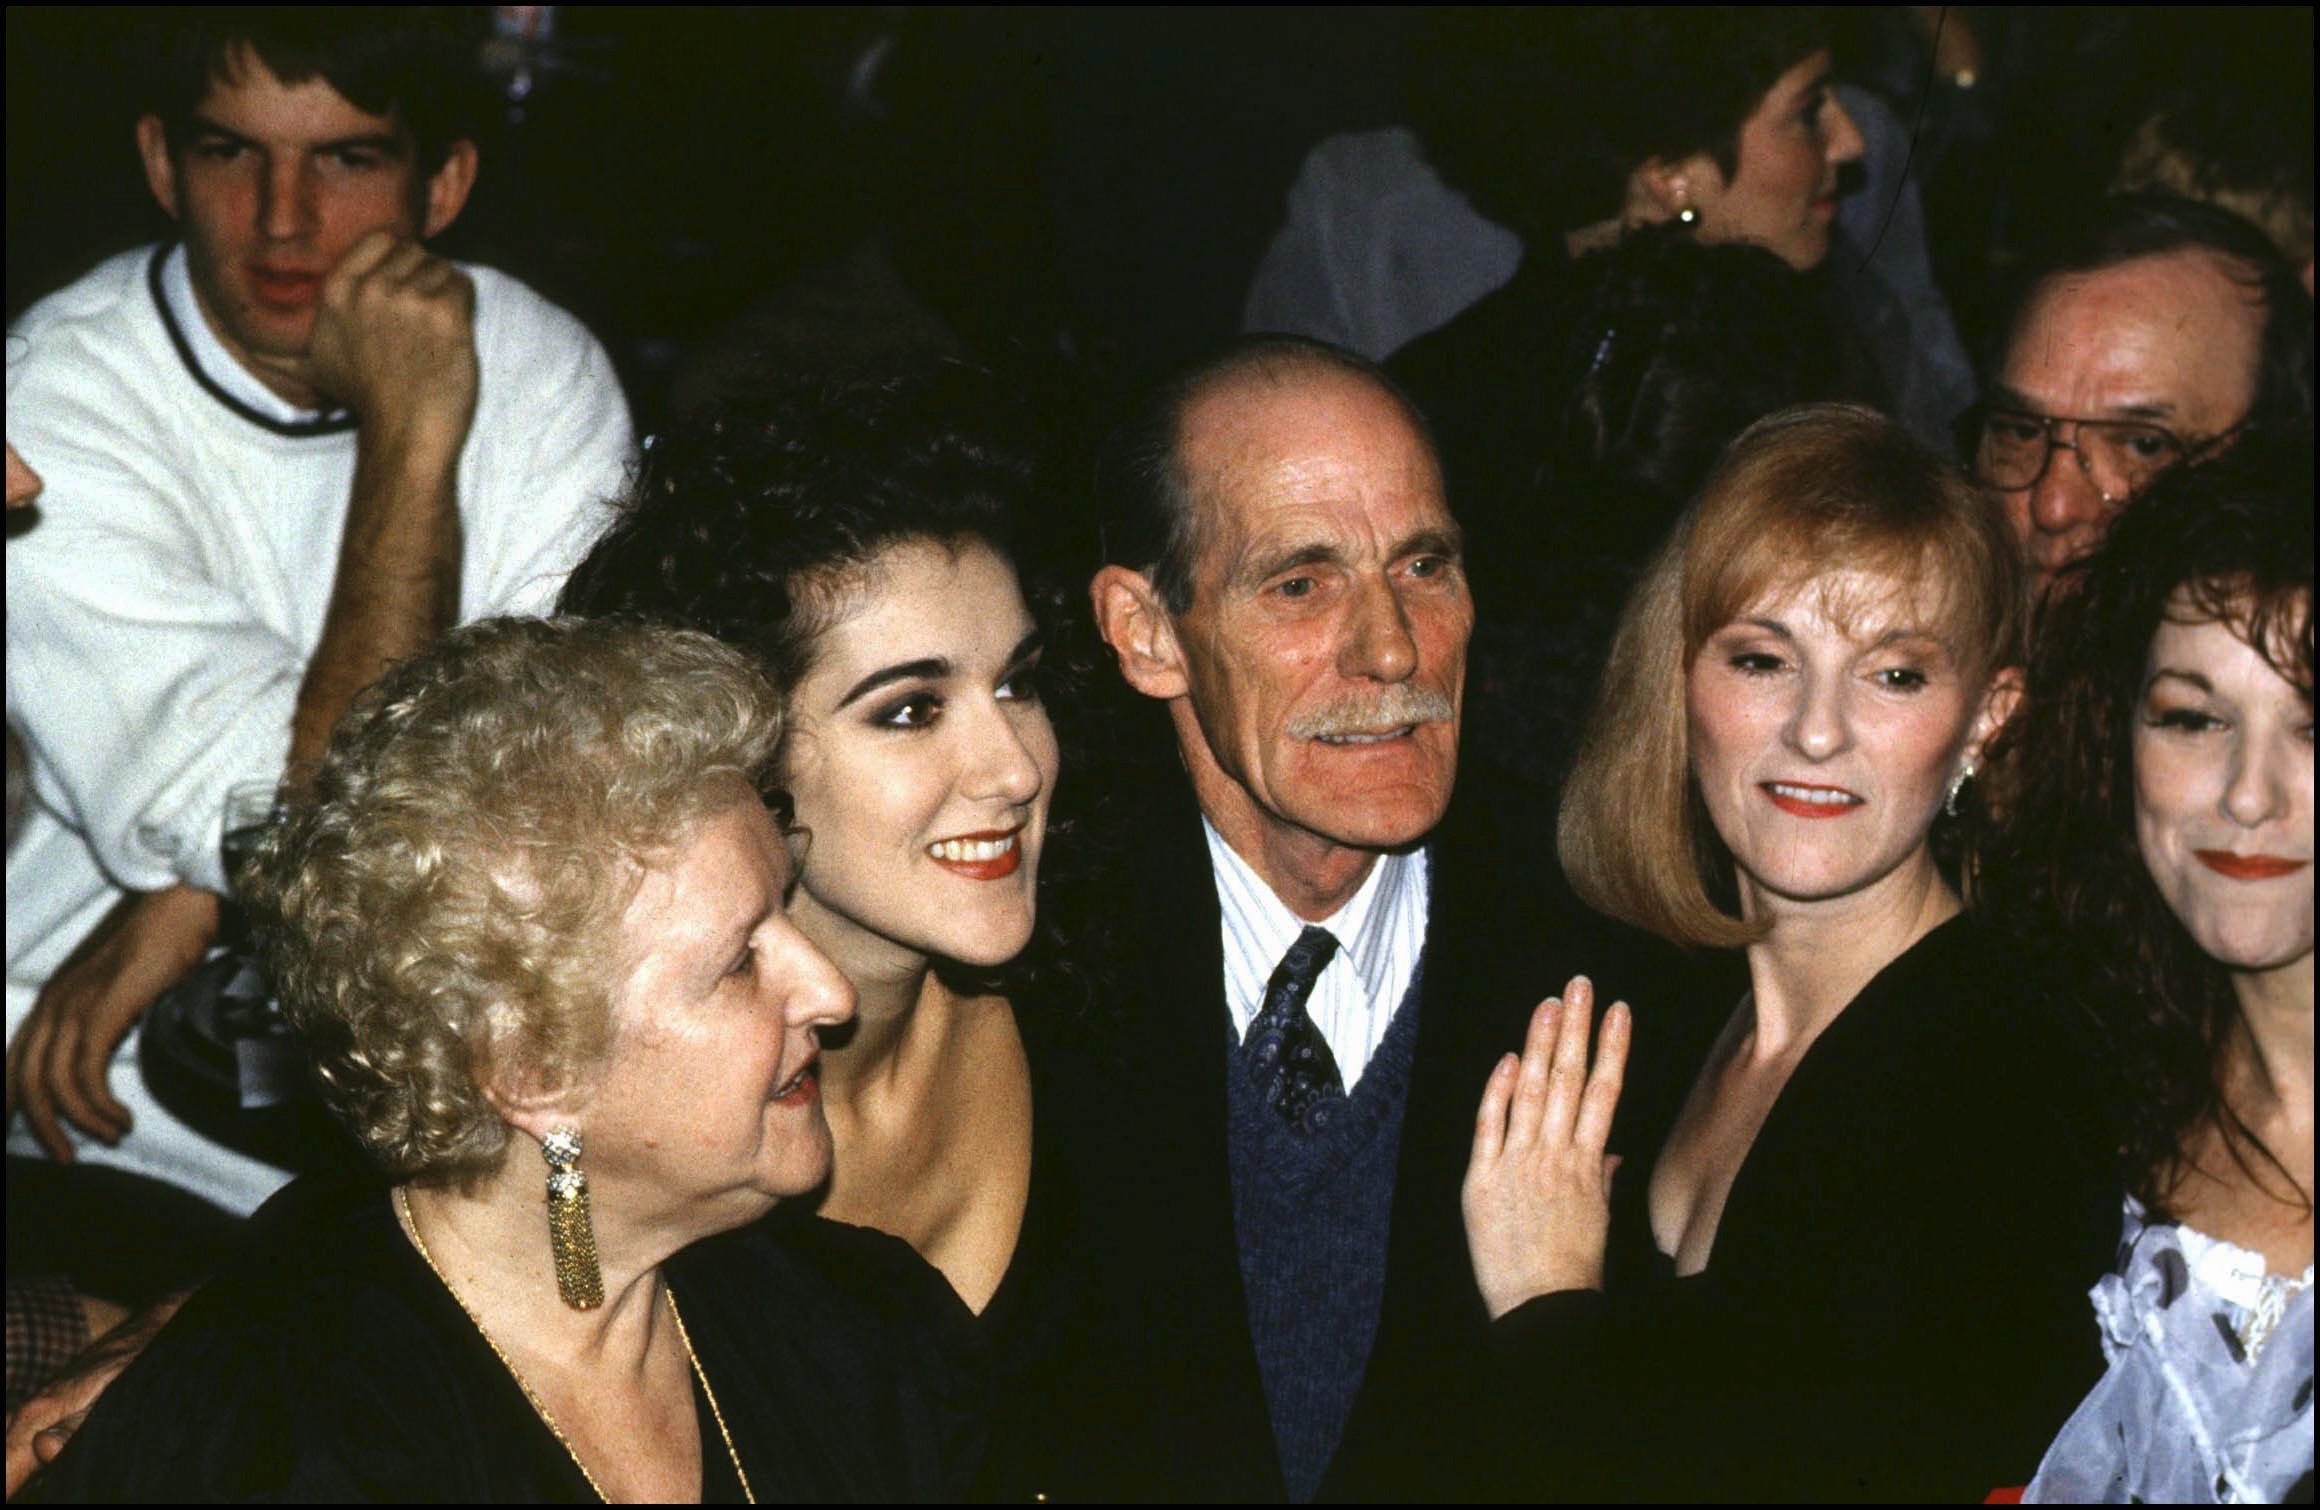 Celine, Adhémar, and Thérèse Dion with some of her sisters in Montreal, Canada, on November 4, 1993. | Source: Getty Images